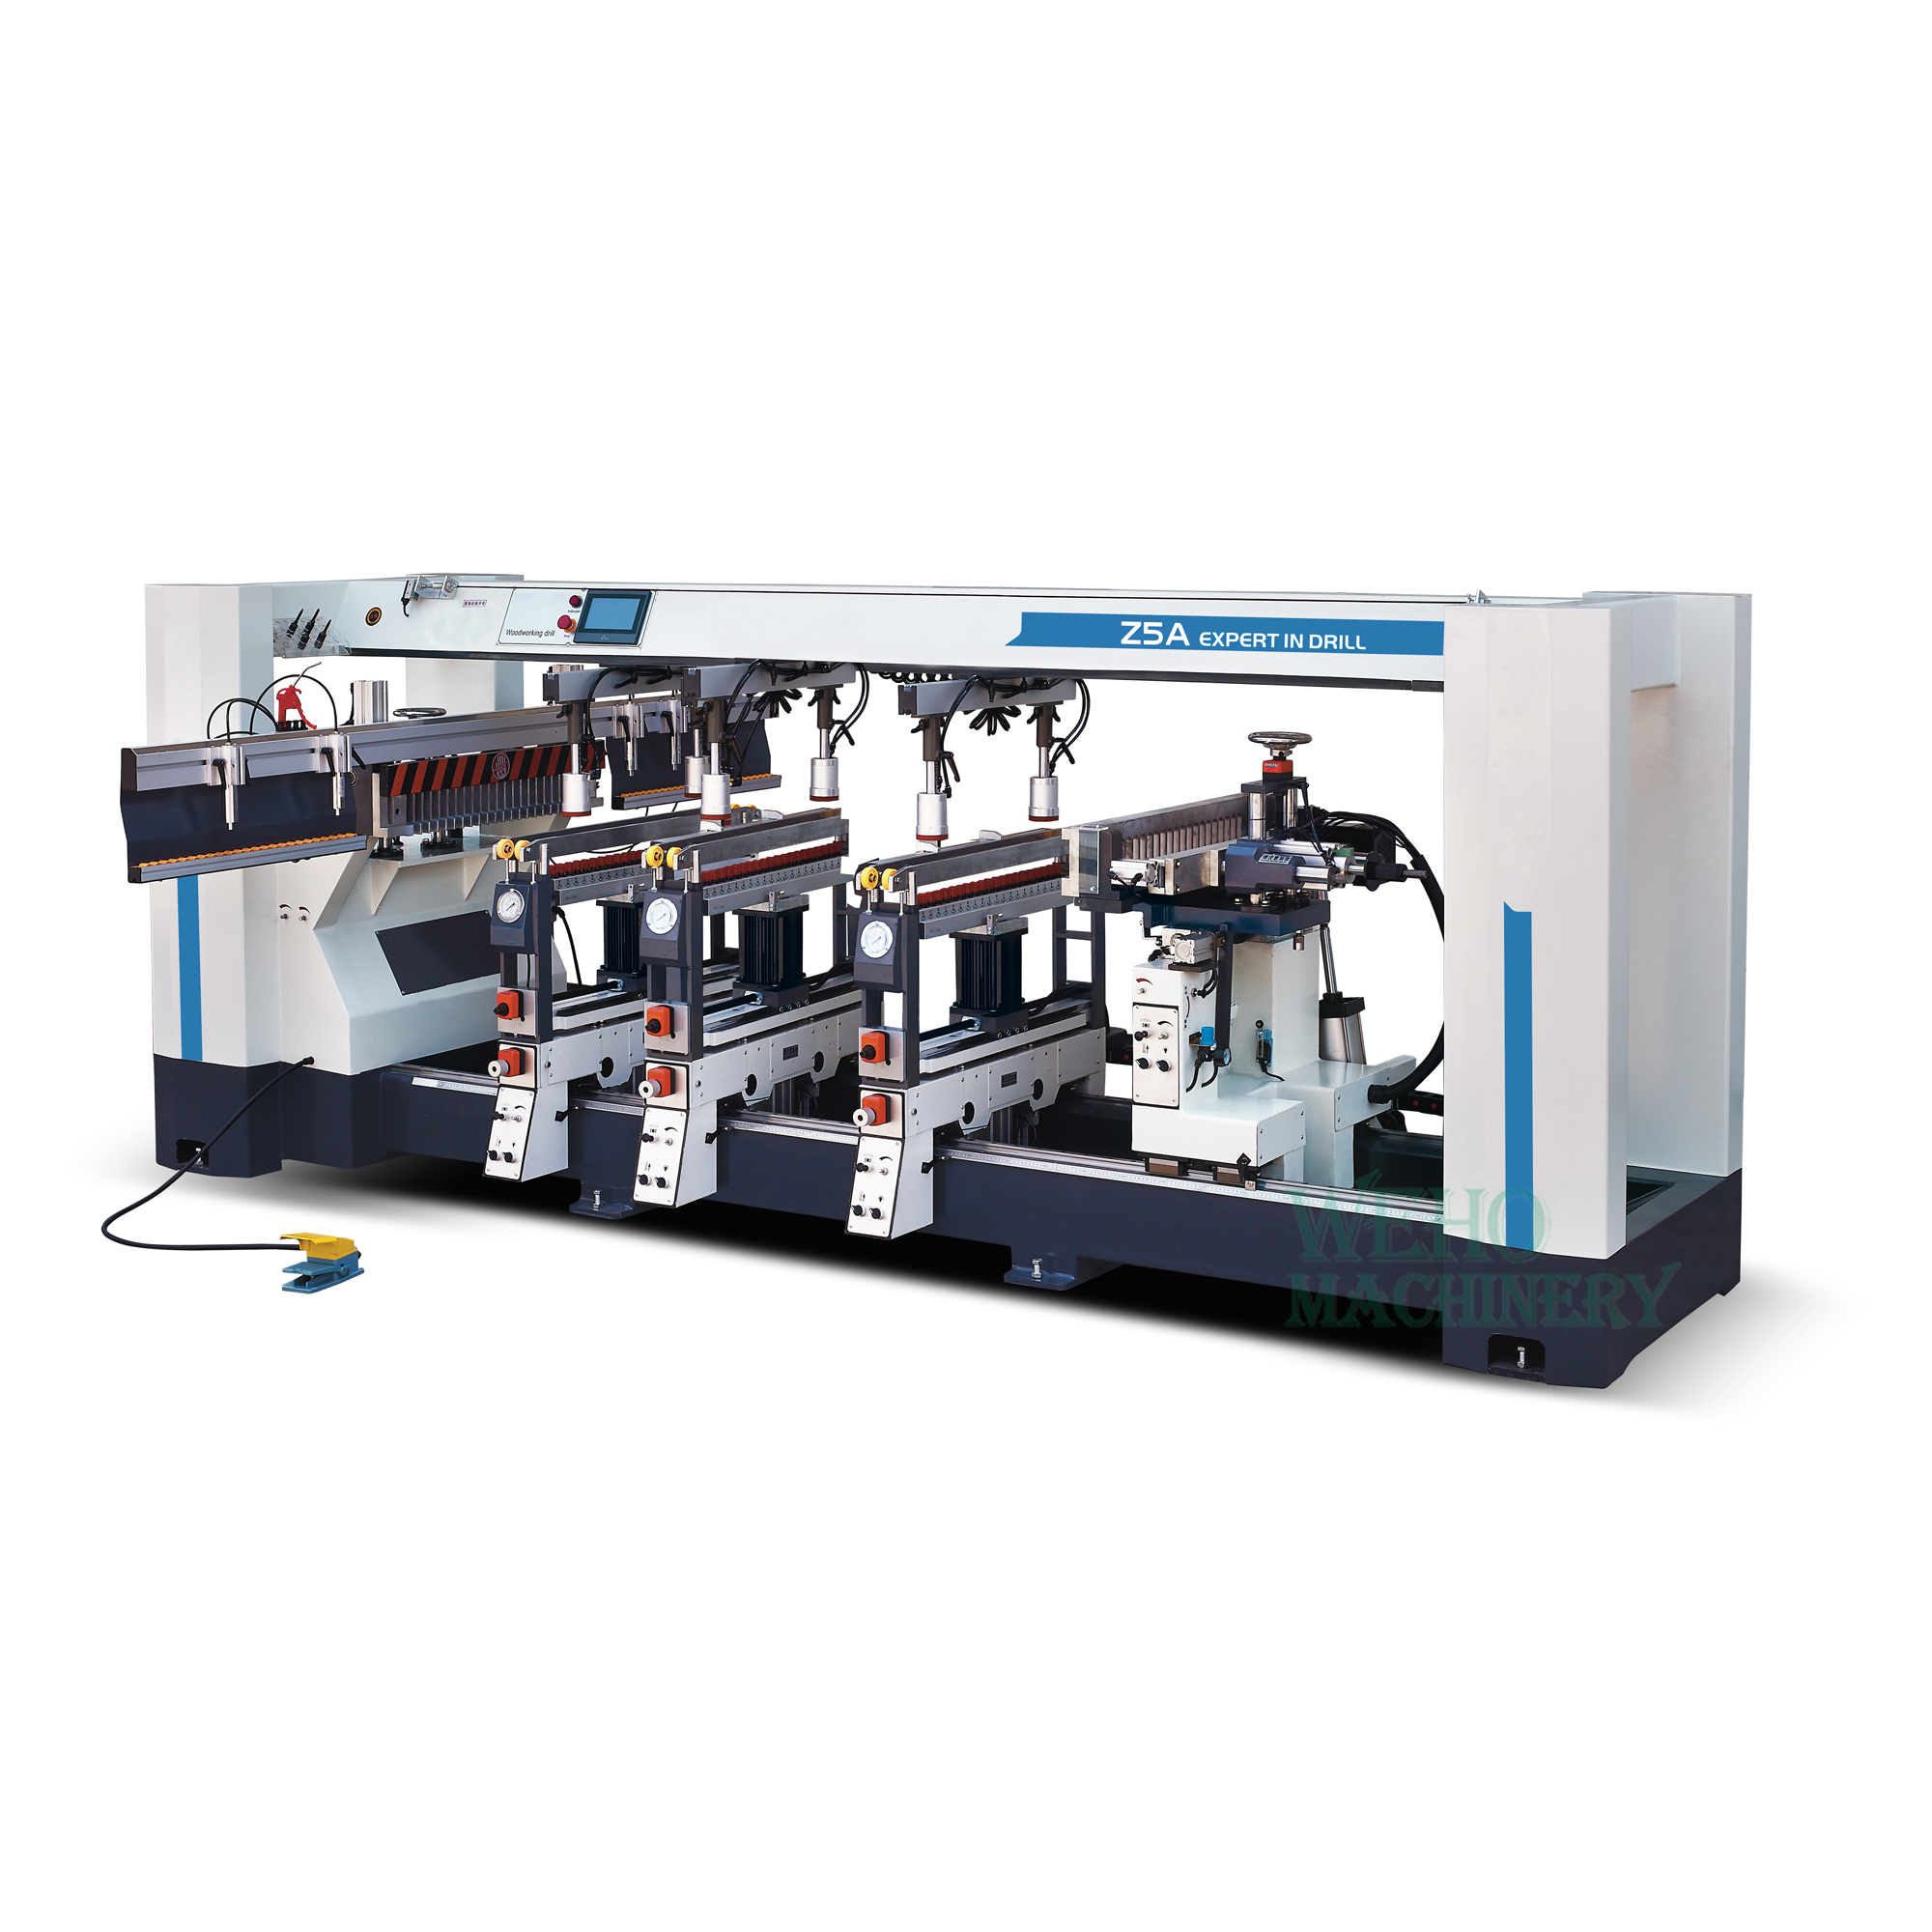 Five-row woodworking reversible multi spindle boring machine